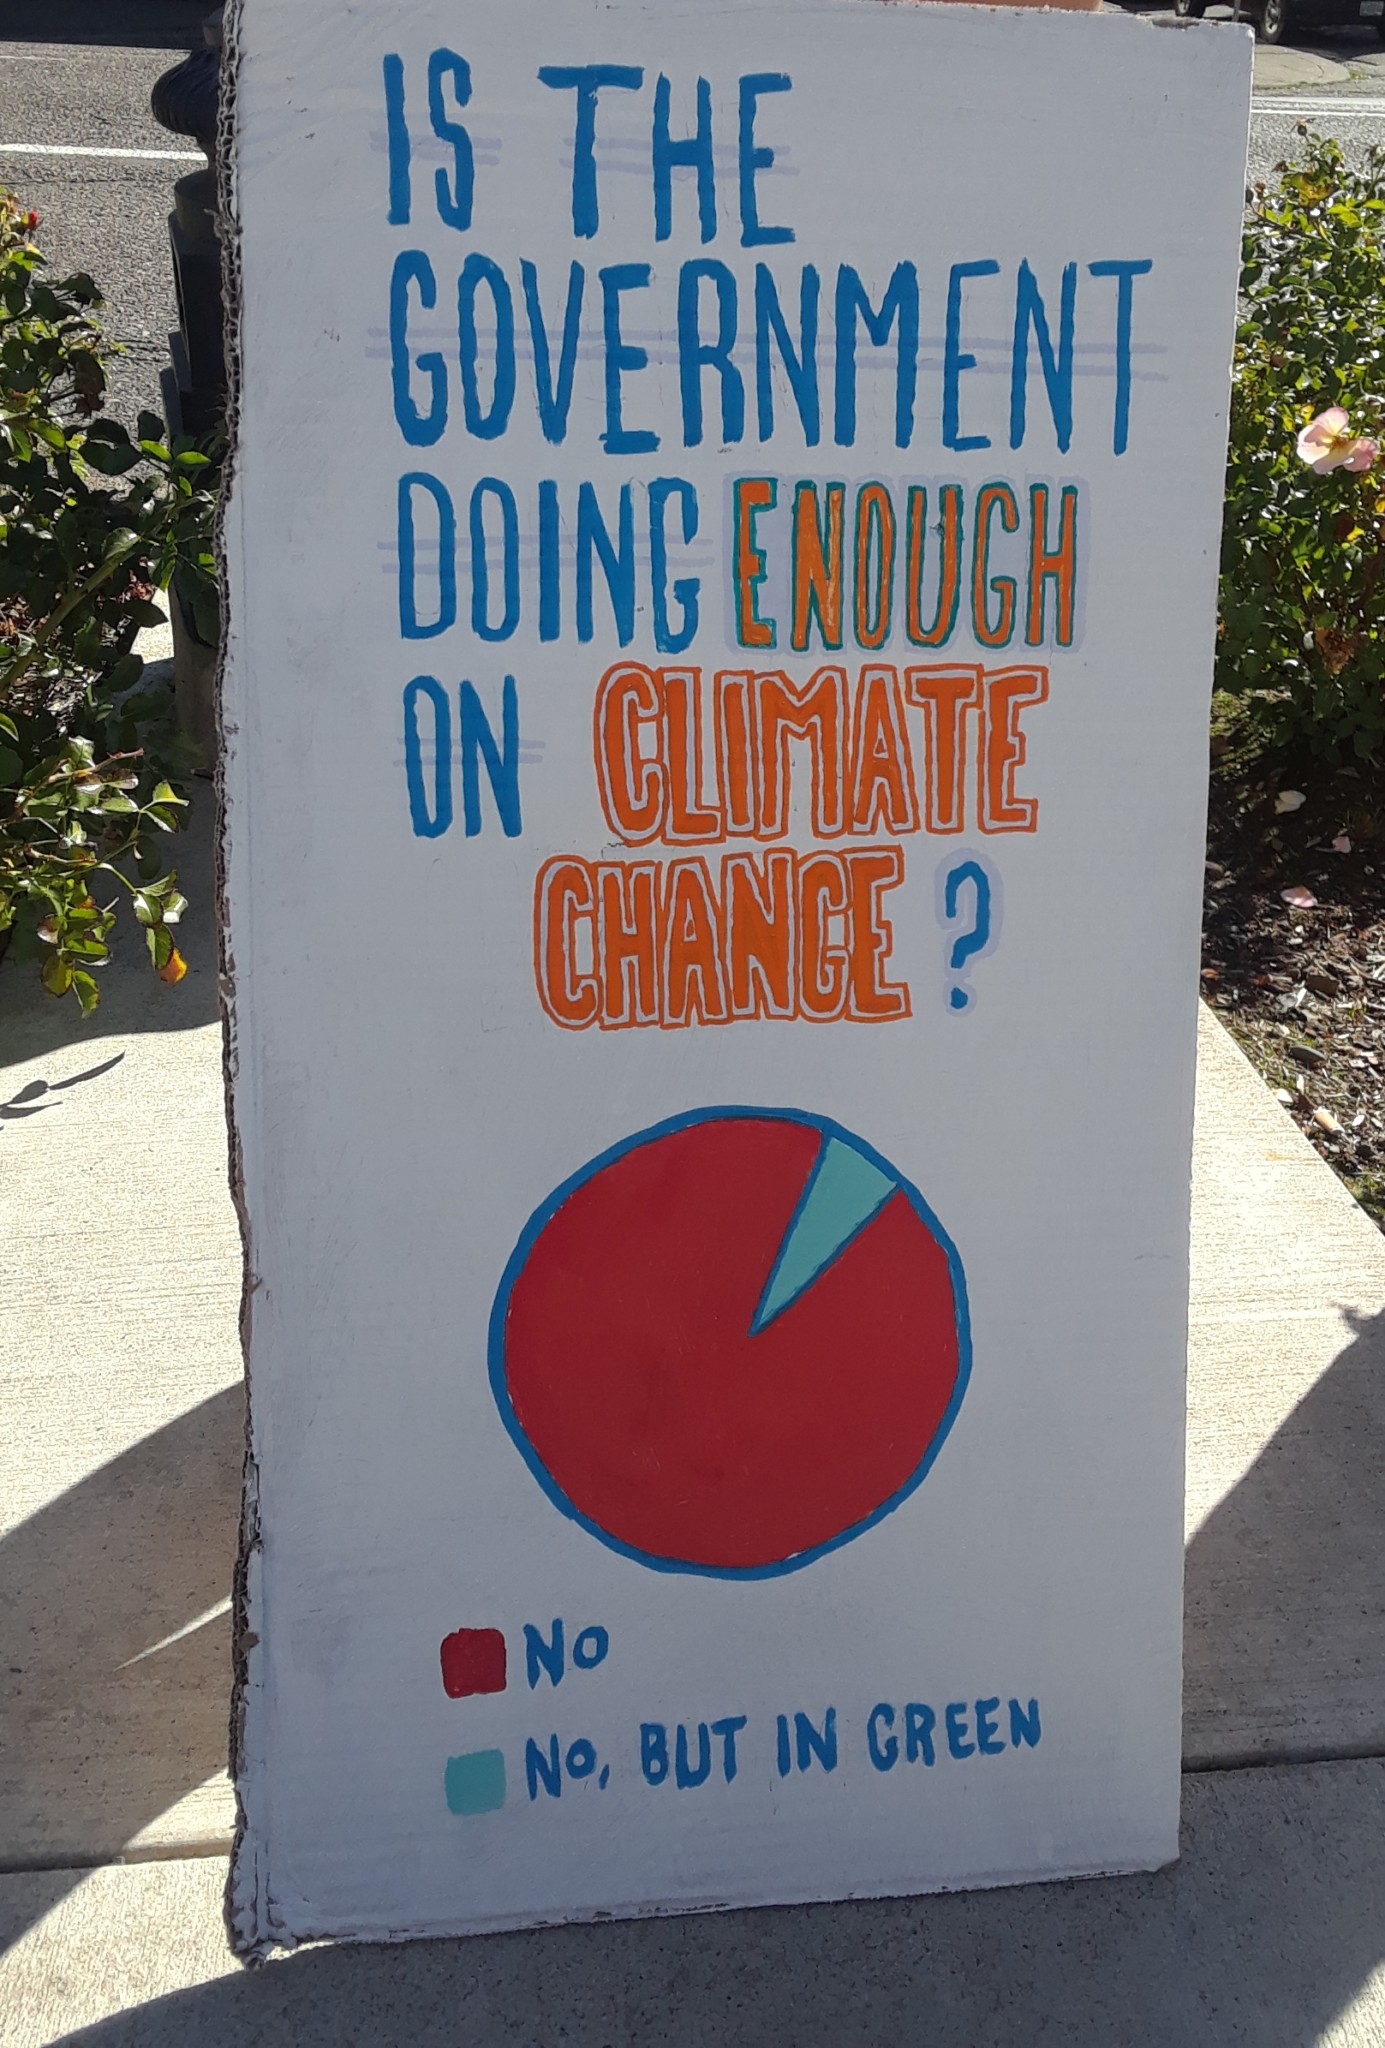 Sign saying "Is the government doing enough on climate change?